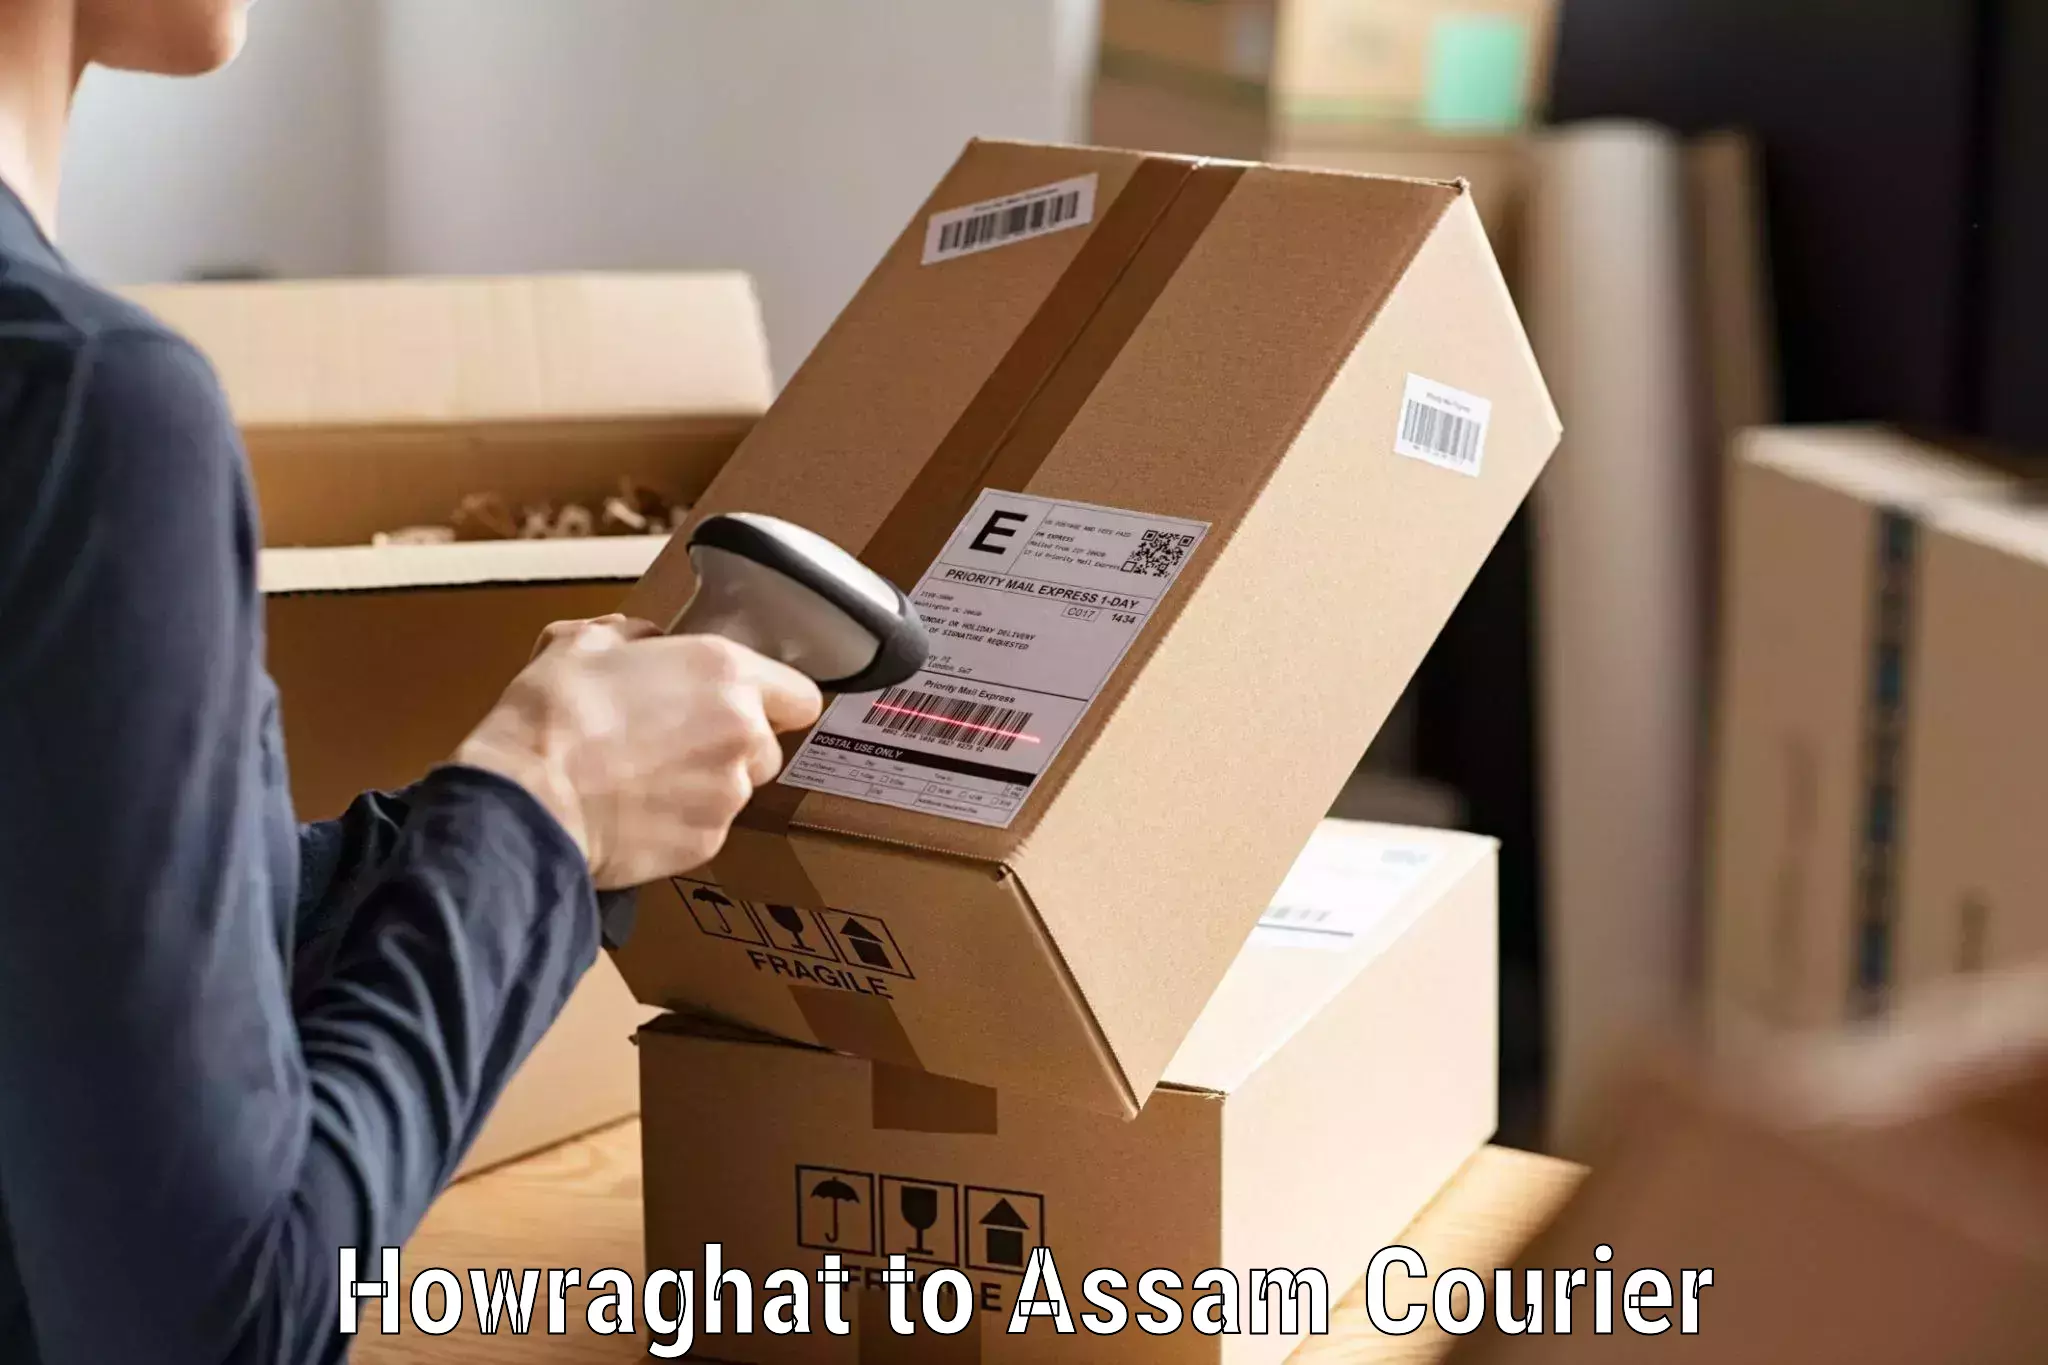 Multi-national courier services Howraghat to Rangia